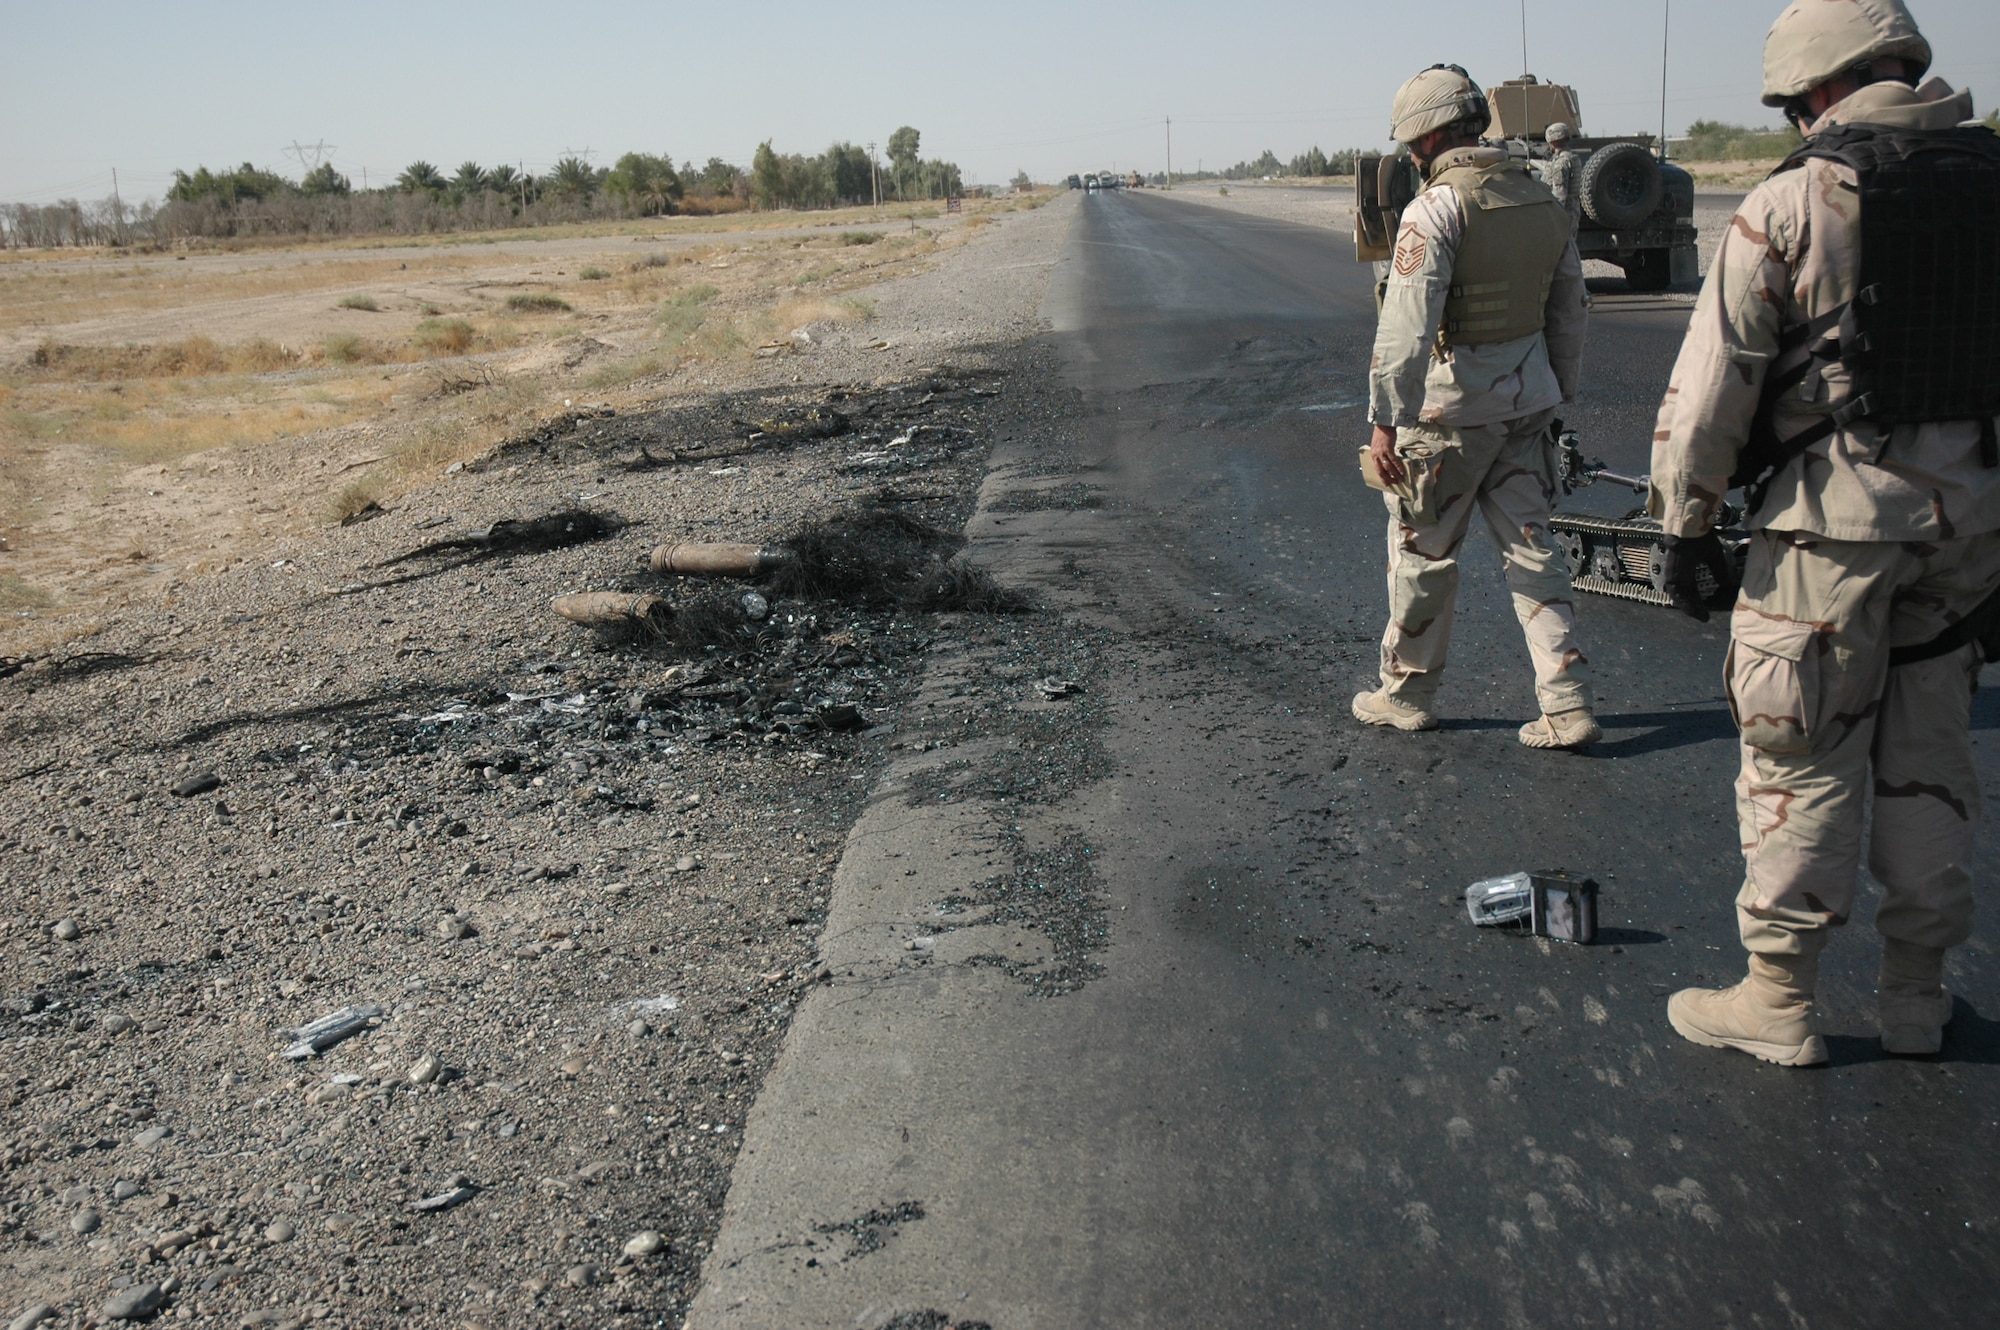 PALIWODA, Iraq -- Waiting for Explosive Ordinance Disposal to confirm the scene is safe, Staff Sgt Christopher Hawks (left) and Master Sgt Albert Schneider (right), prepare to collect evidence and obtain pictures.  The EOD team from Paliwoda and Schneider's Weapons Intelligence Team had just arrived at the scene of two Improvised Explosive Devices detonations targeting civilian vehicles on Main Supply Route Tampa.  (Courtesy photo)